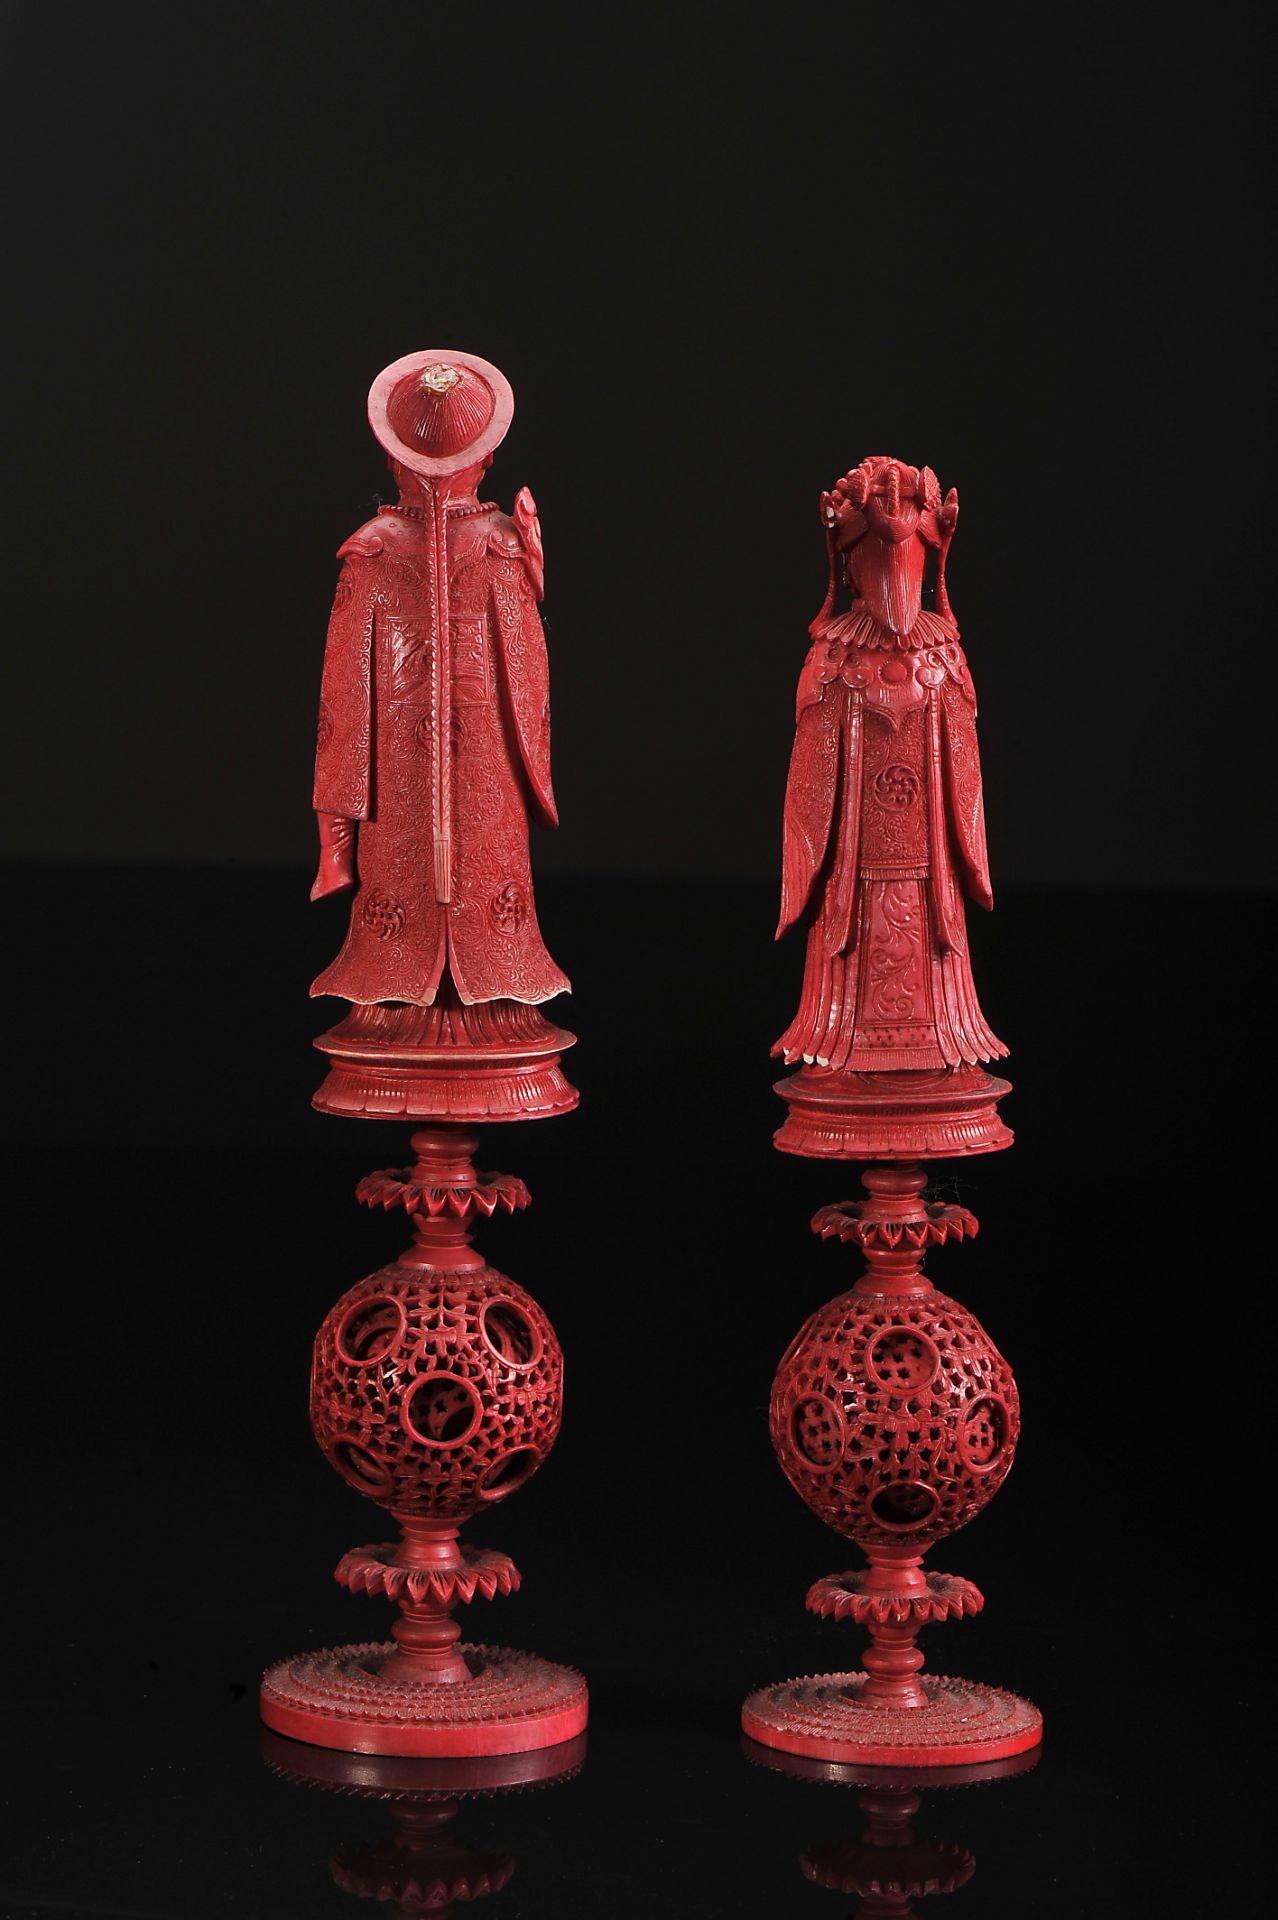 "Emperor" and "Empress" chess pieces based on "Ball of happiness" - Image 3 of 4